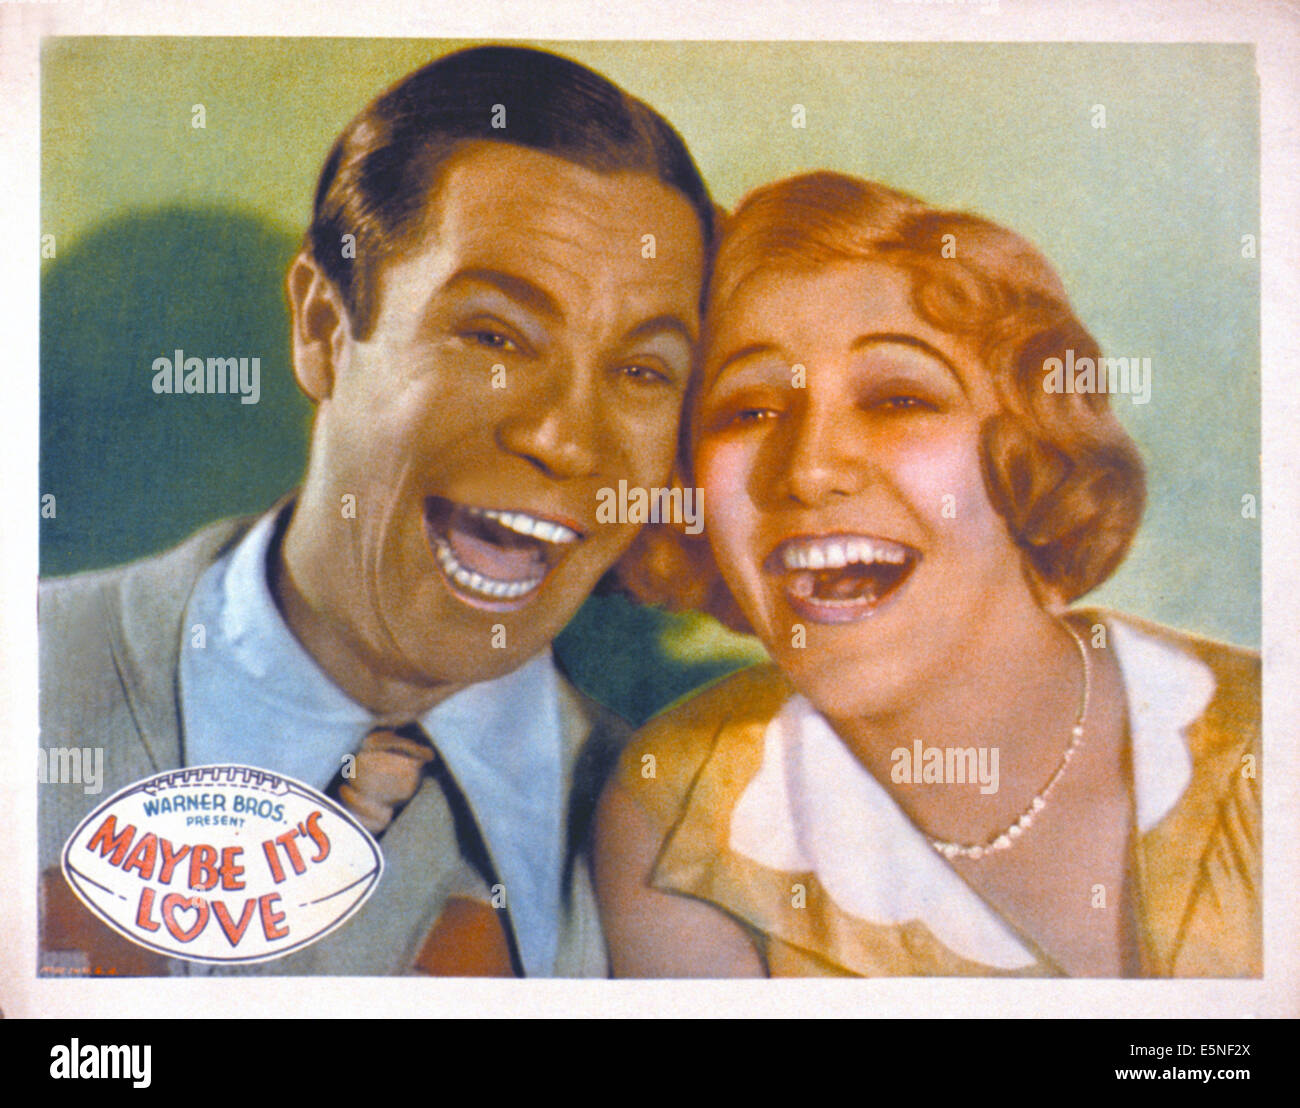 MAYBE IT'S LOVE, (aka ELEVEN MEN AND A GIRL), l-r: Joe E. Brown, Laura Lee on lobbycard, 1930. Stock Photo